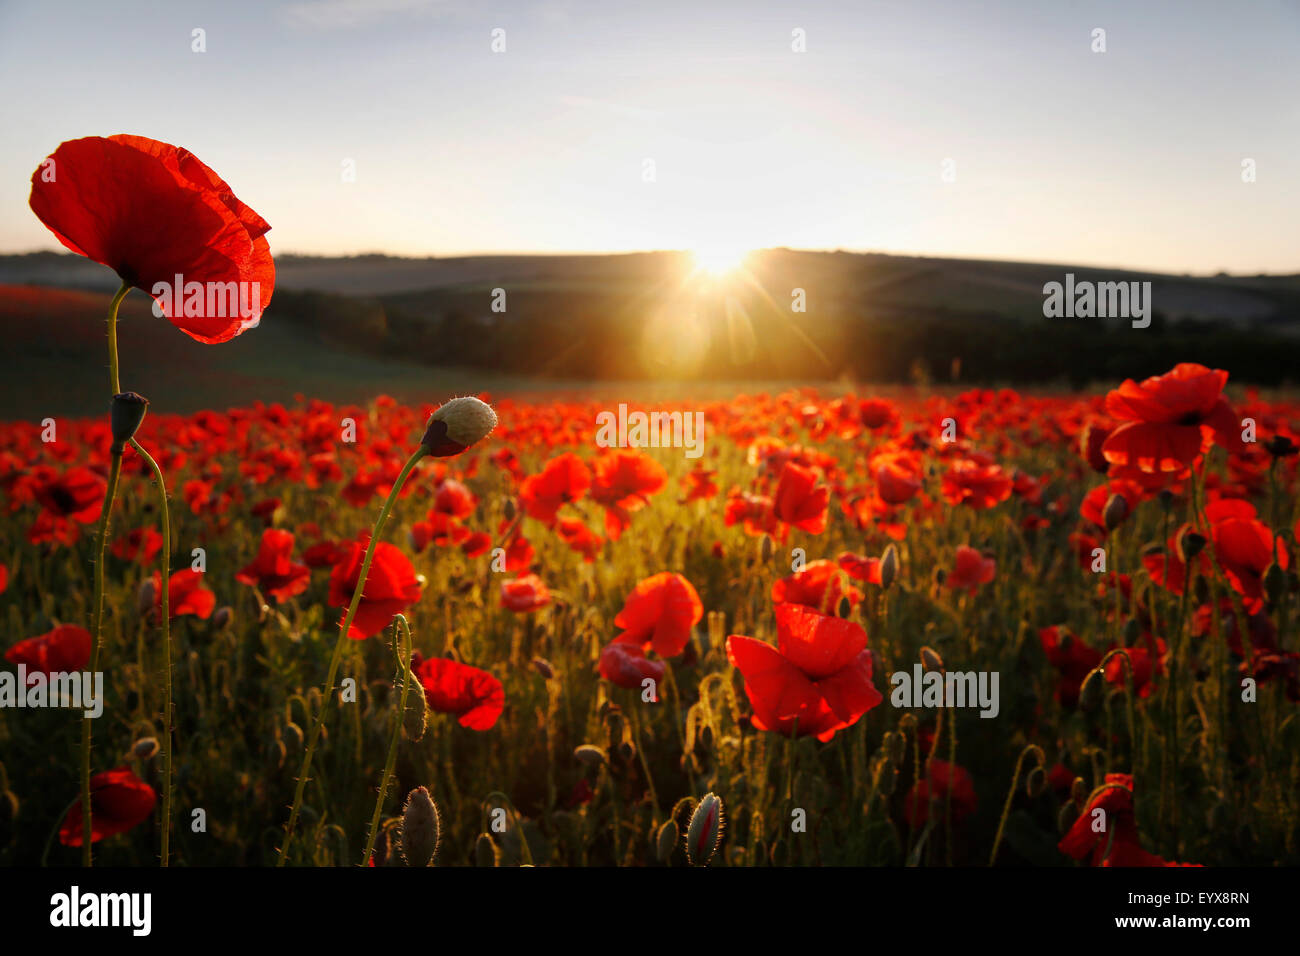 A swathe of poppies glow red in as the sun rises over the South Downs at Pycombe near Brighton in southern Engalnd UK July 31, 2 Stock Photo